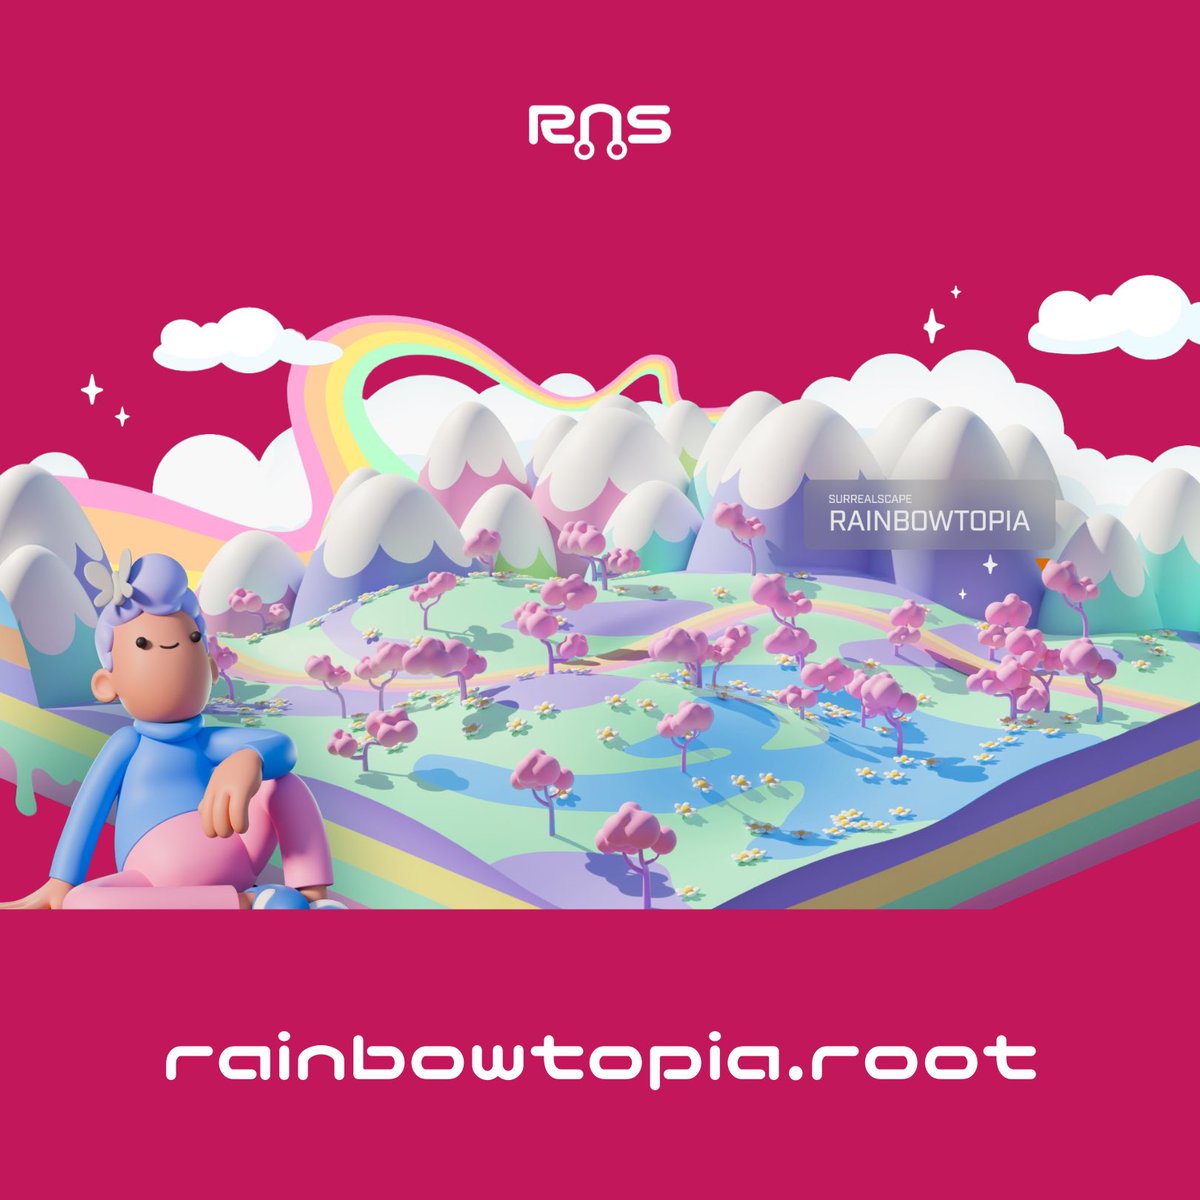 Welcome to the family, @doodles! 🌈✨ Dive into the Third Kingdom and forge your legacy in Rainbowtopia. With your newly airdropped SurrealScapes, your @TheRootNetwork journey begins. Who will you be known as in this majestic realm? RNS coming soon 🫡